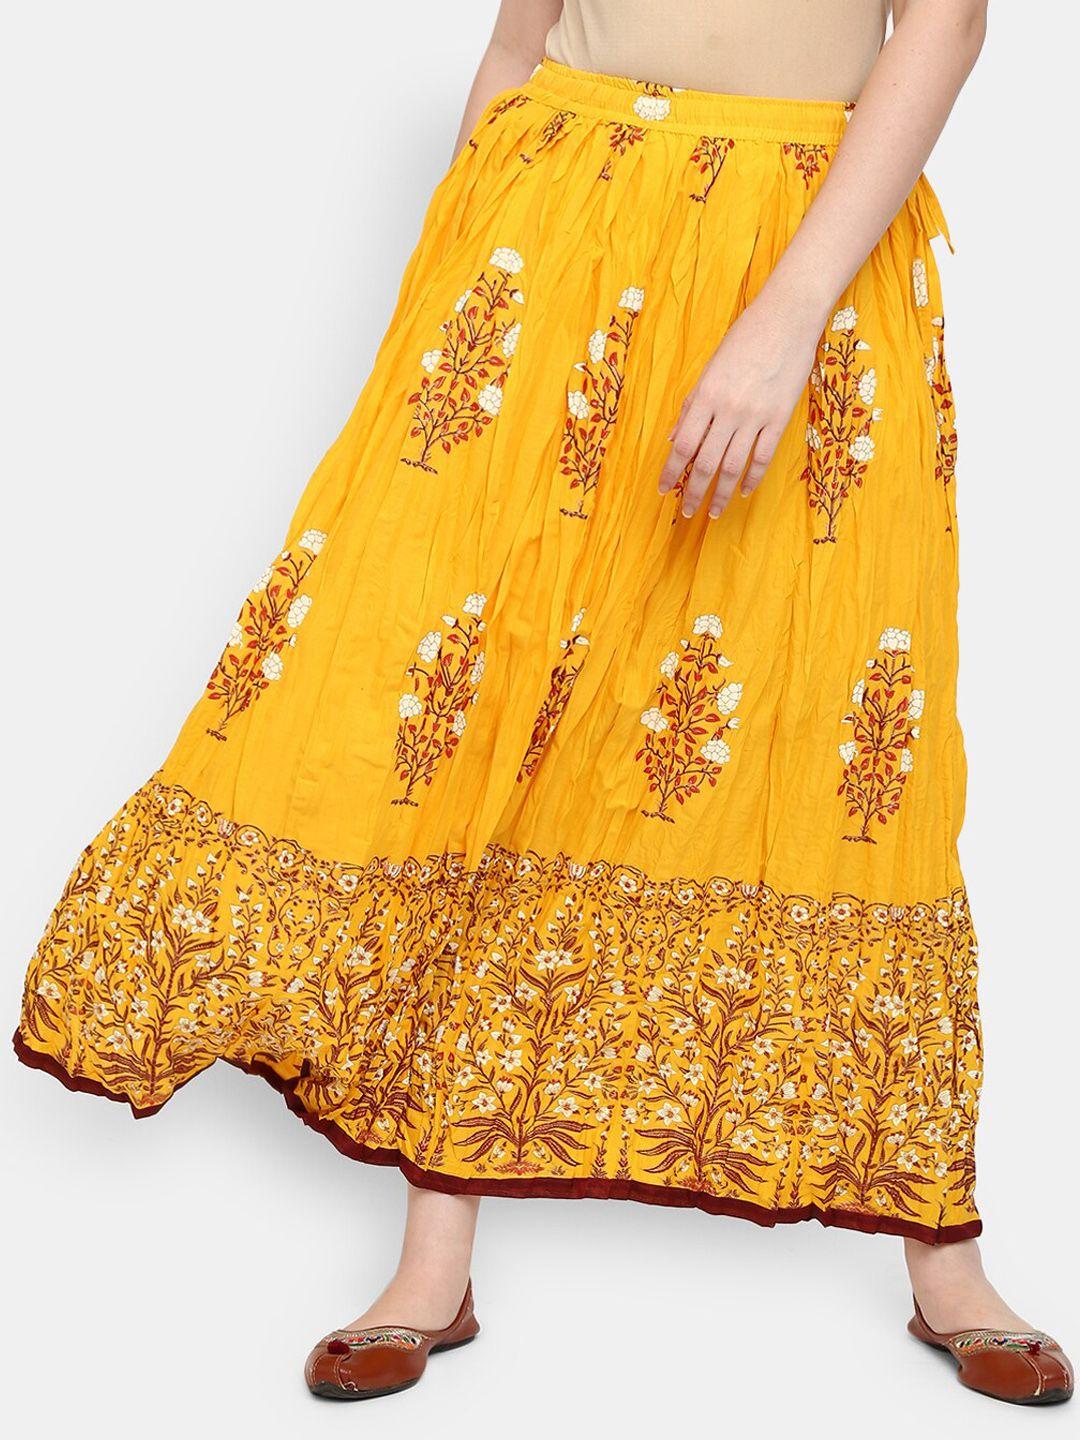 v-mart women yellow & maroon floral printed pure cotton flared skirt